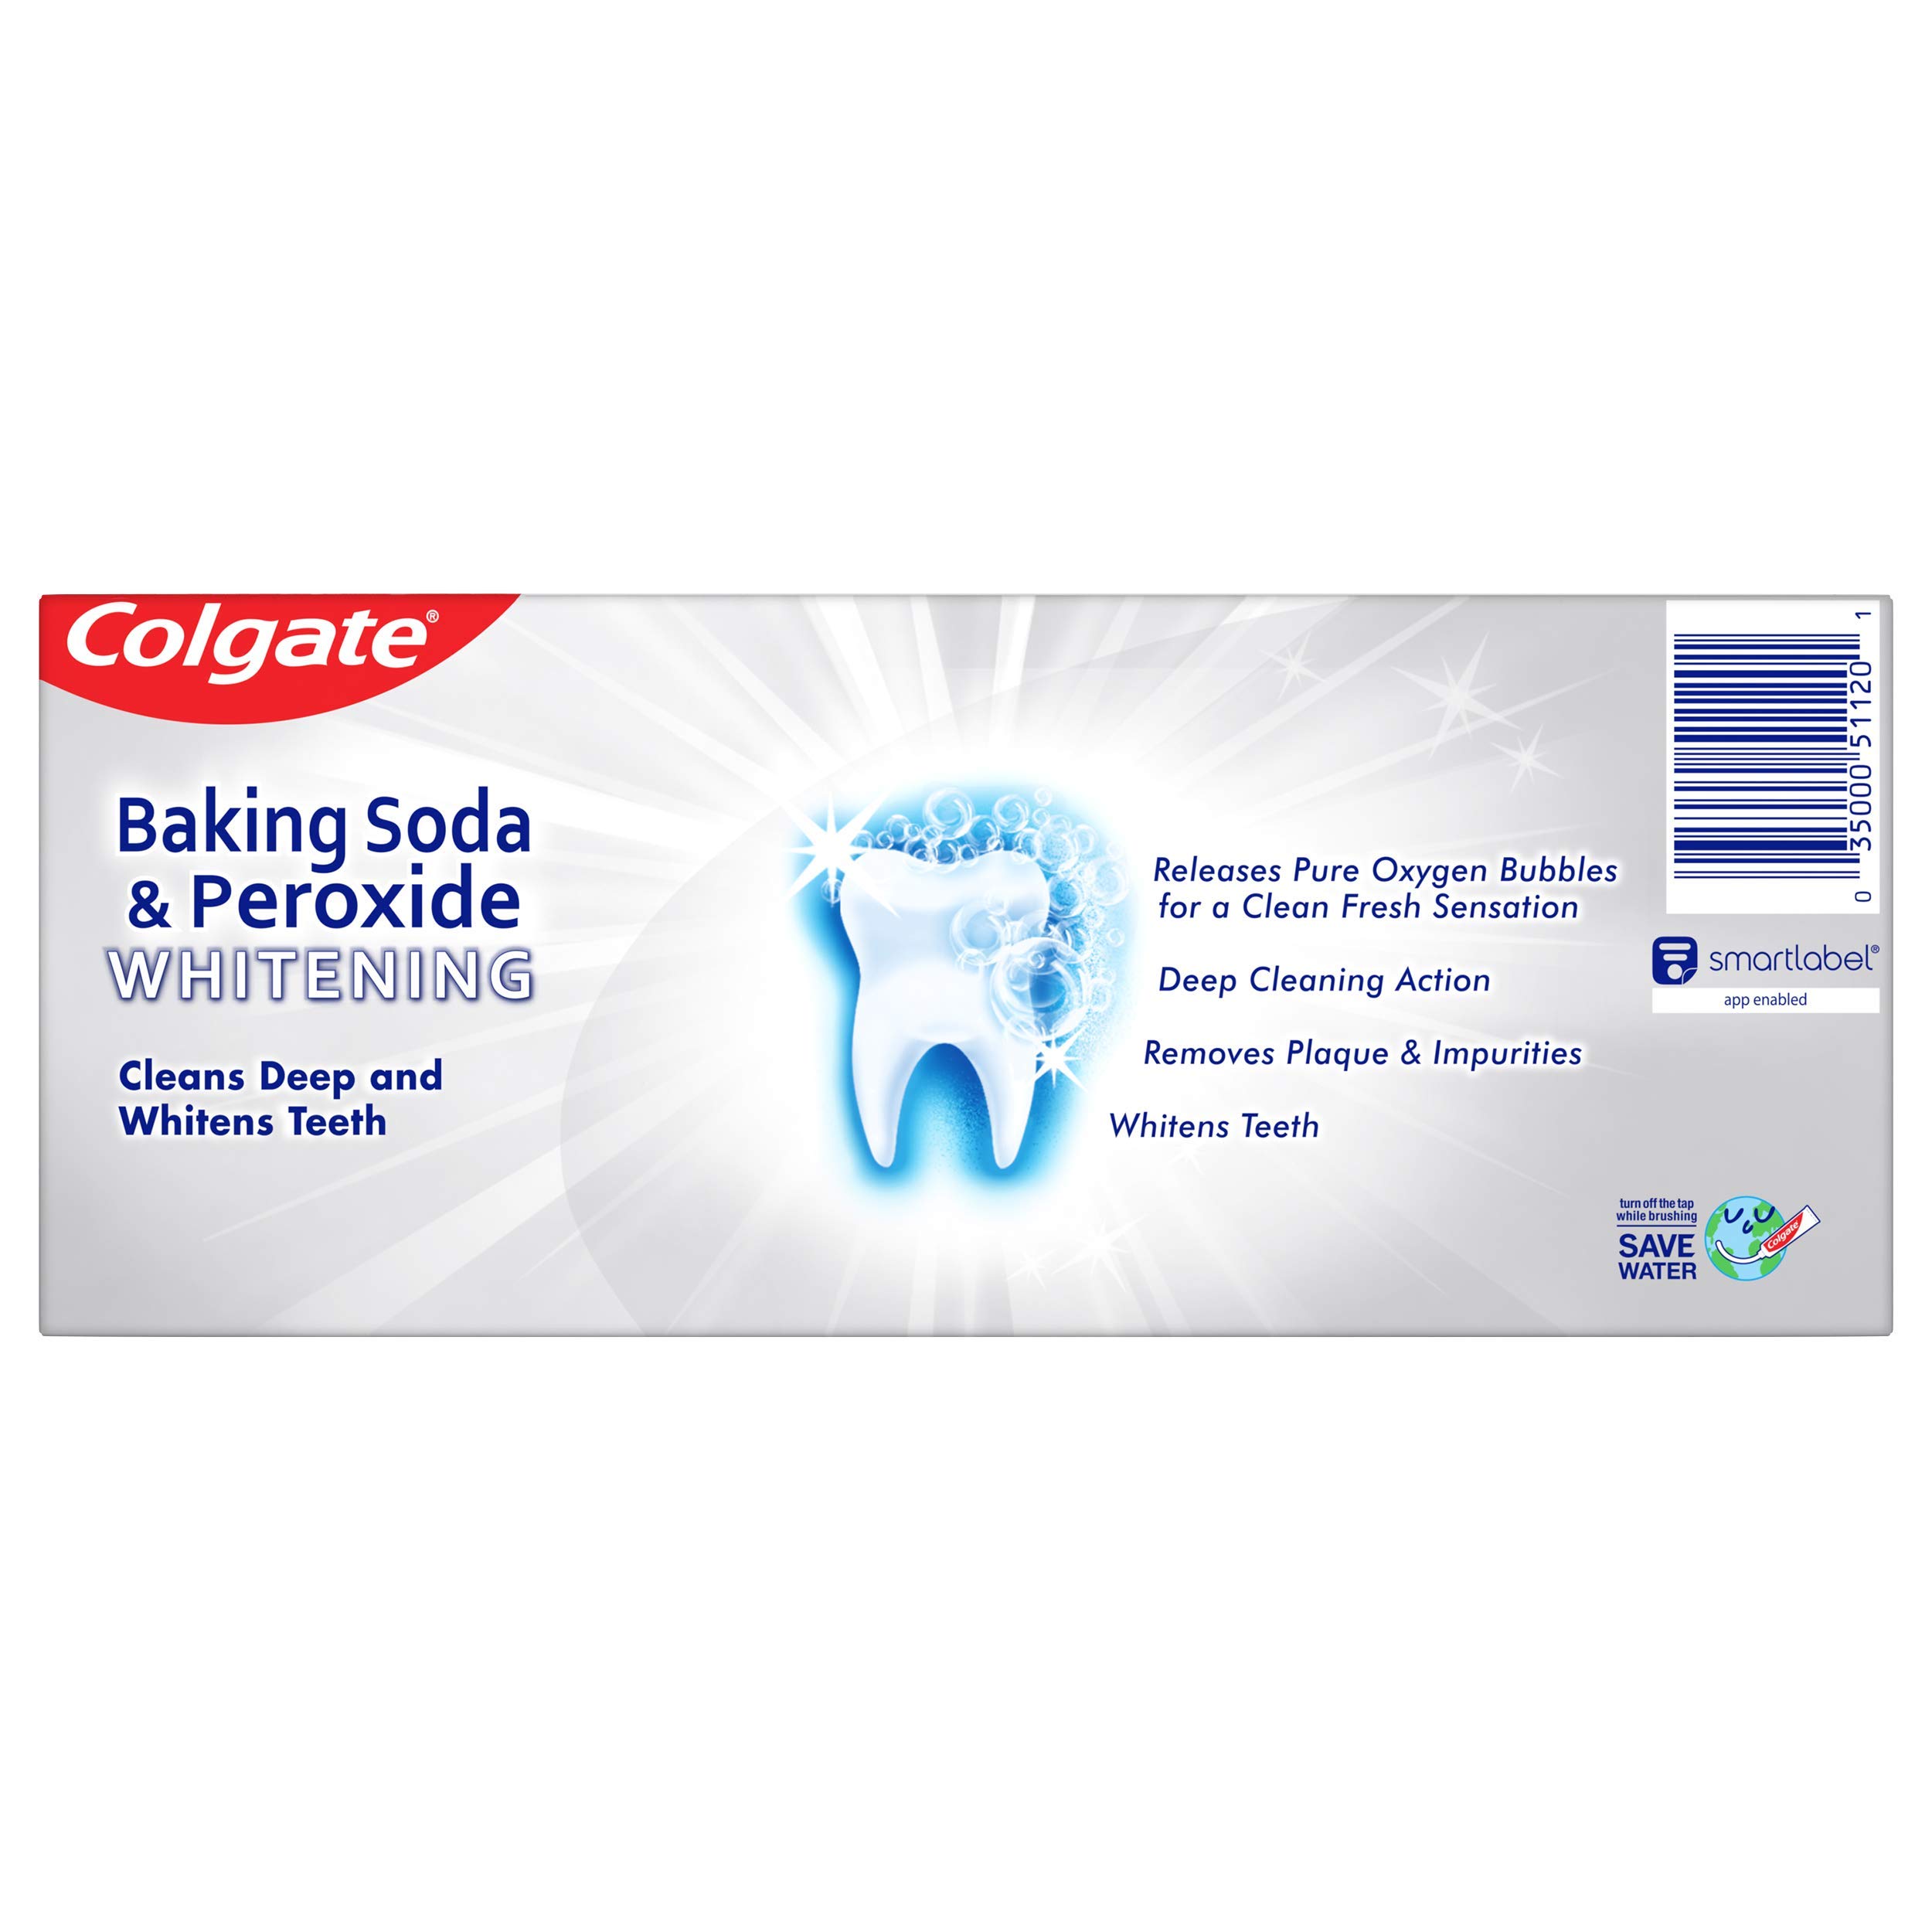 Colgate Baking Soda and Peroxide Toothpaste, Whitening Brisk Mint Flavor, Whitens Teeth, Fights Cavities and Removes Surface Stains for Whiter Teeth, 6 Oz Tube, 2 Pack